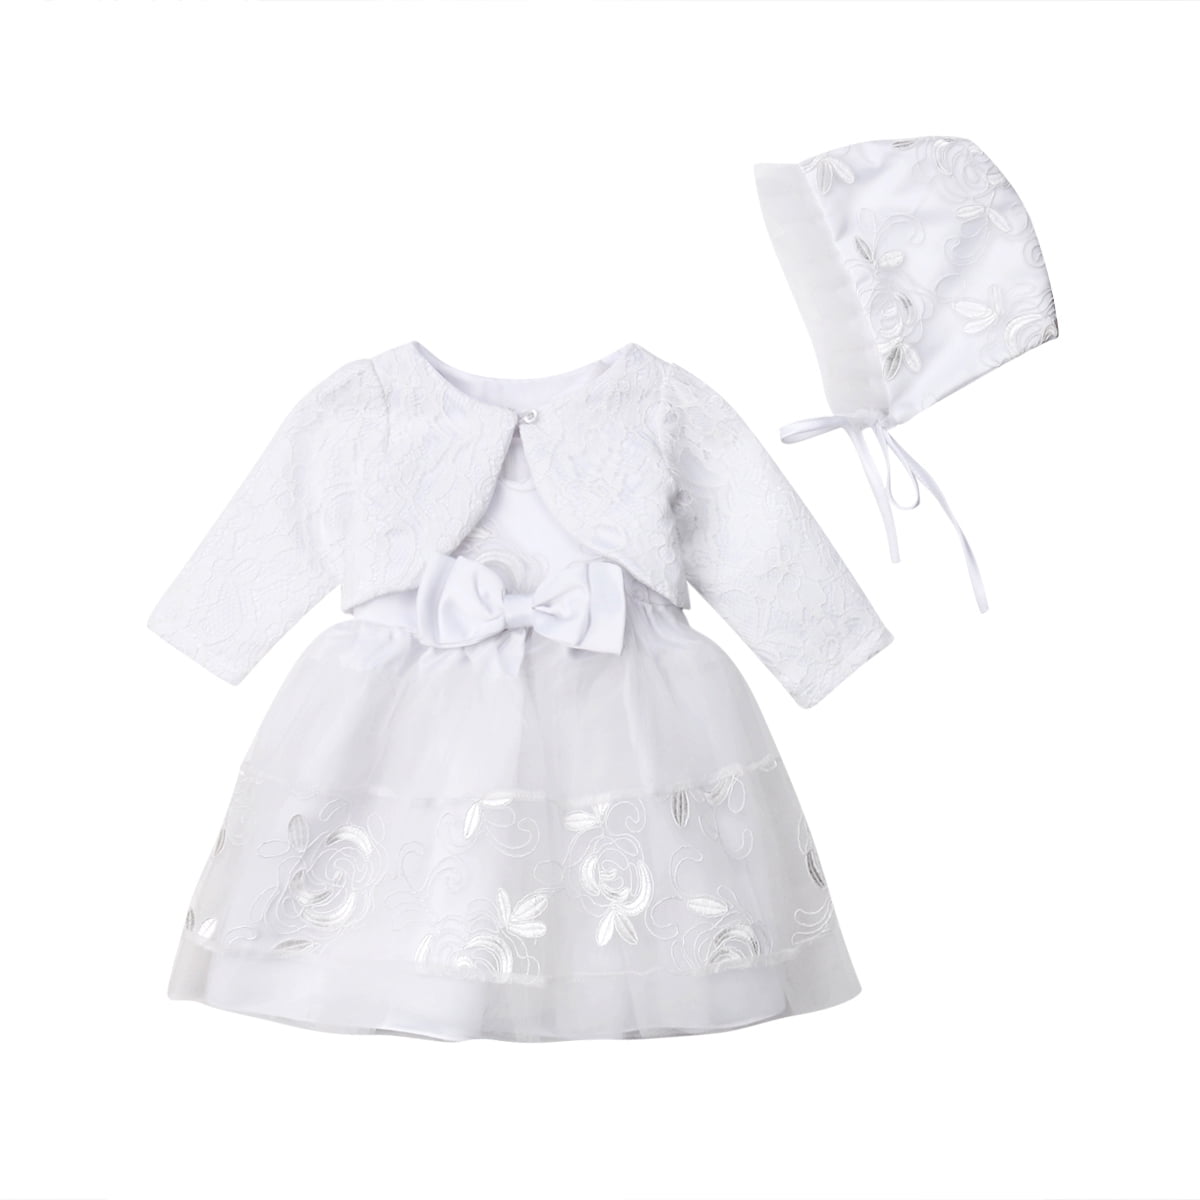 Baby Lace Christening Party Dress Bonnet Jacket White Pink 0 3 6 9 12 18 Months 